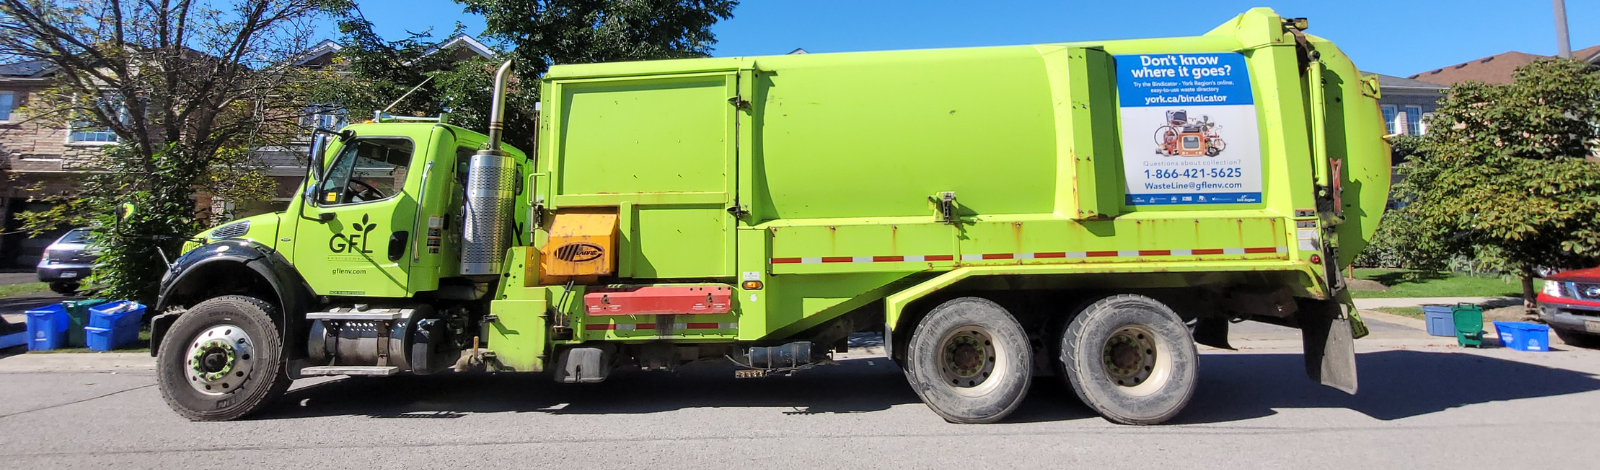 Garbage Truck with words Right Hand Drive Caution, Vehicle stops and back frequently